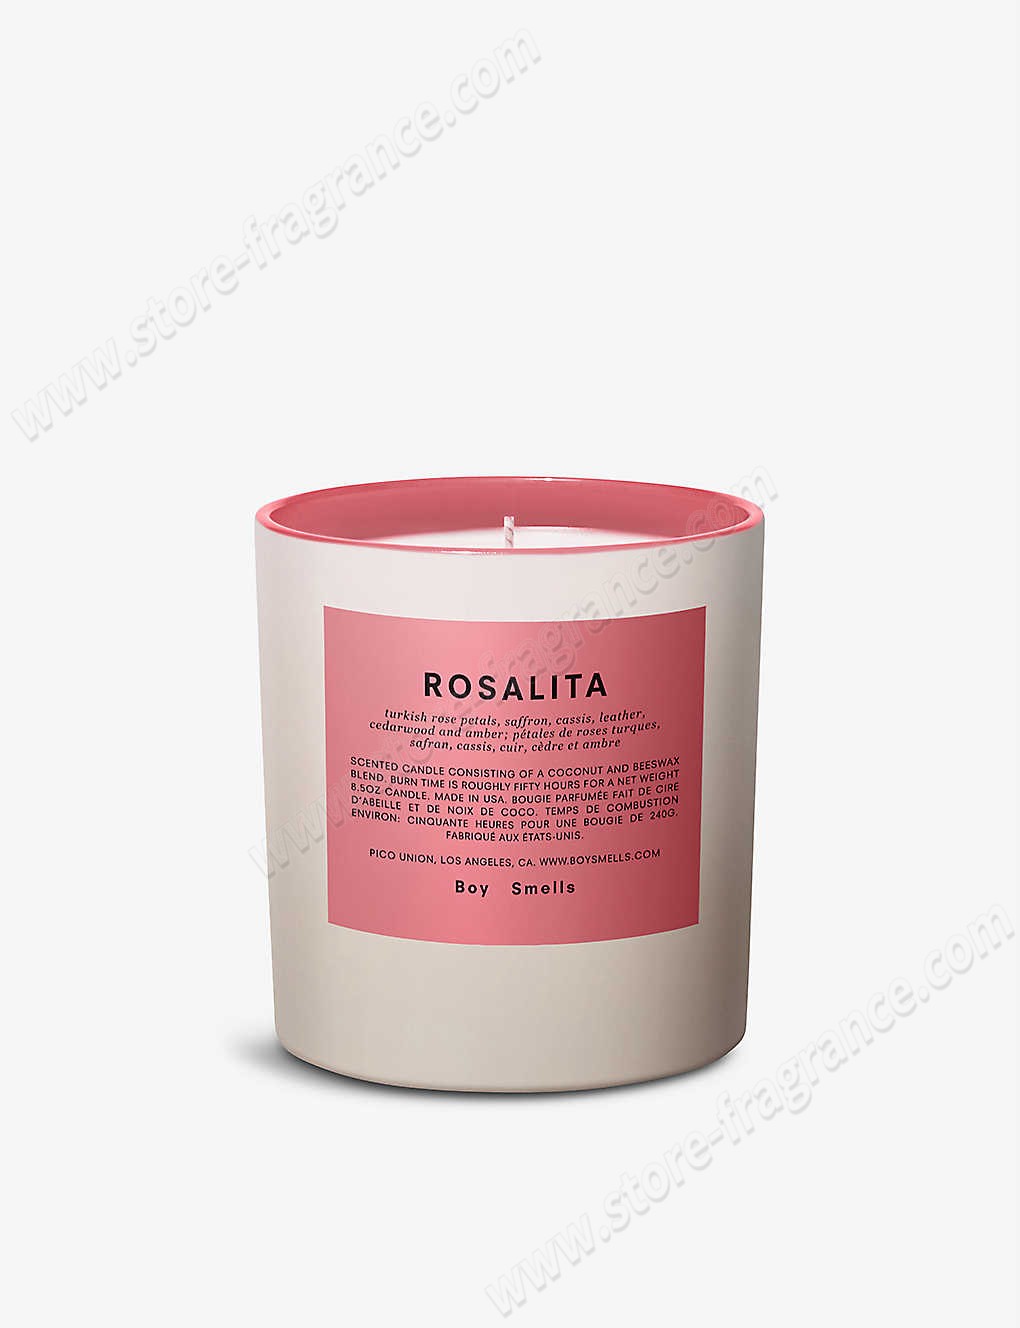 BOY SMELLS/Pride Rosalita scented candle 240g ✿ Discount Store - -0